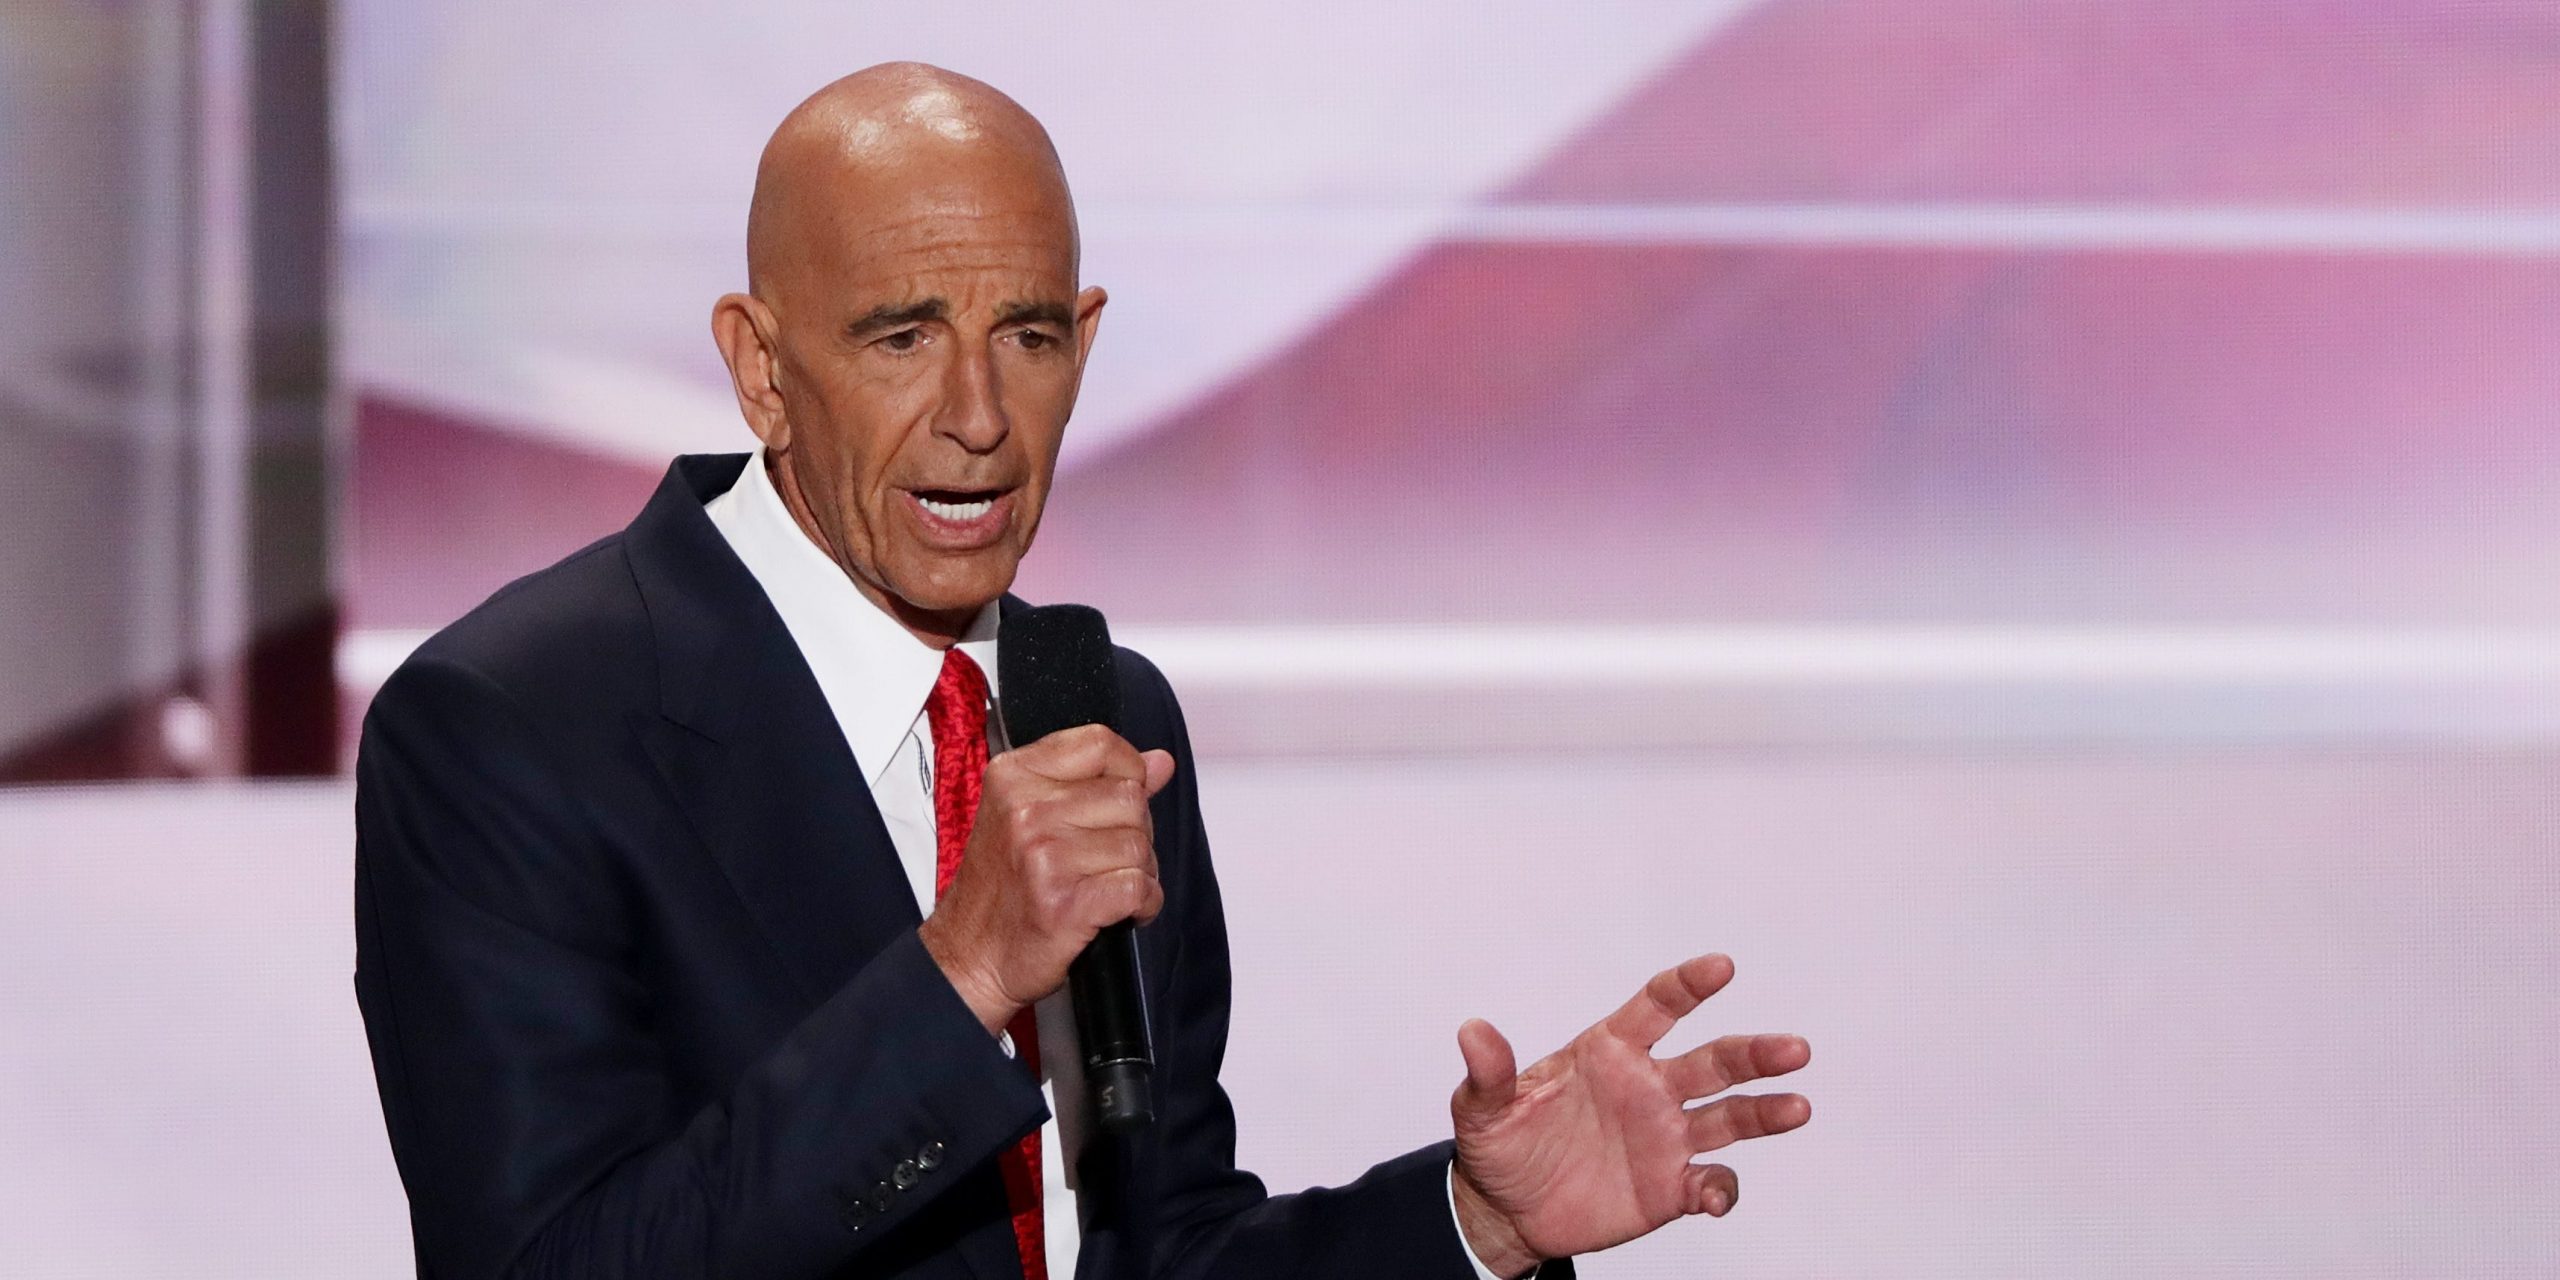 Tom Barrack, former Deputy Interior Undersecretary in the Reagan administration, delivers a speech on the fourth day of the Republican National Convention on July 21, 2016 at the Quicken Loans Arena in Cleveland, Ohio.